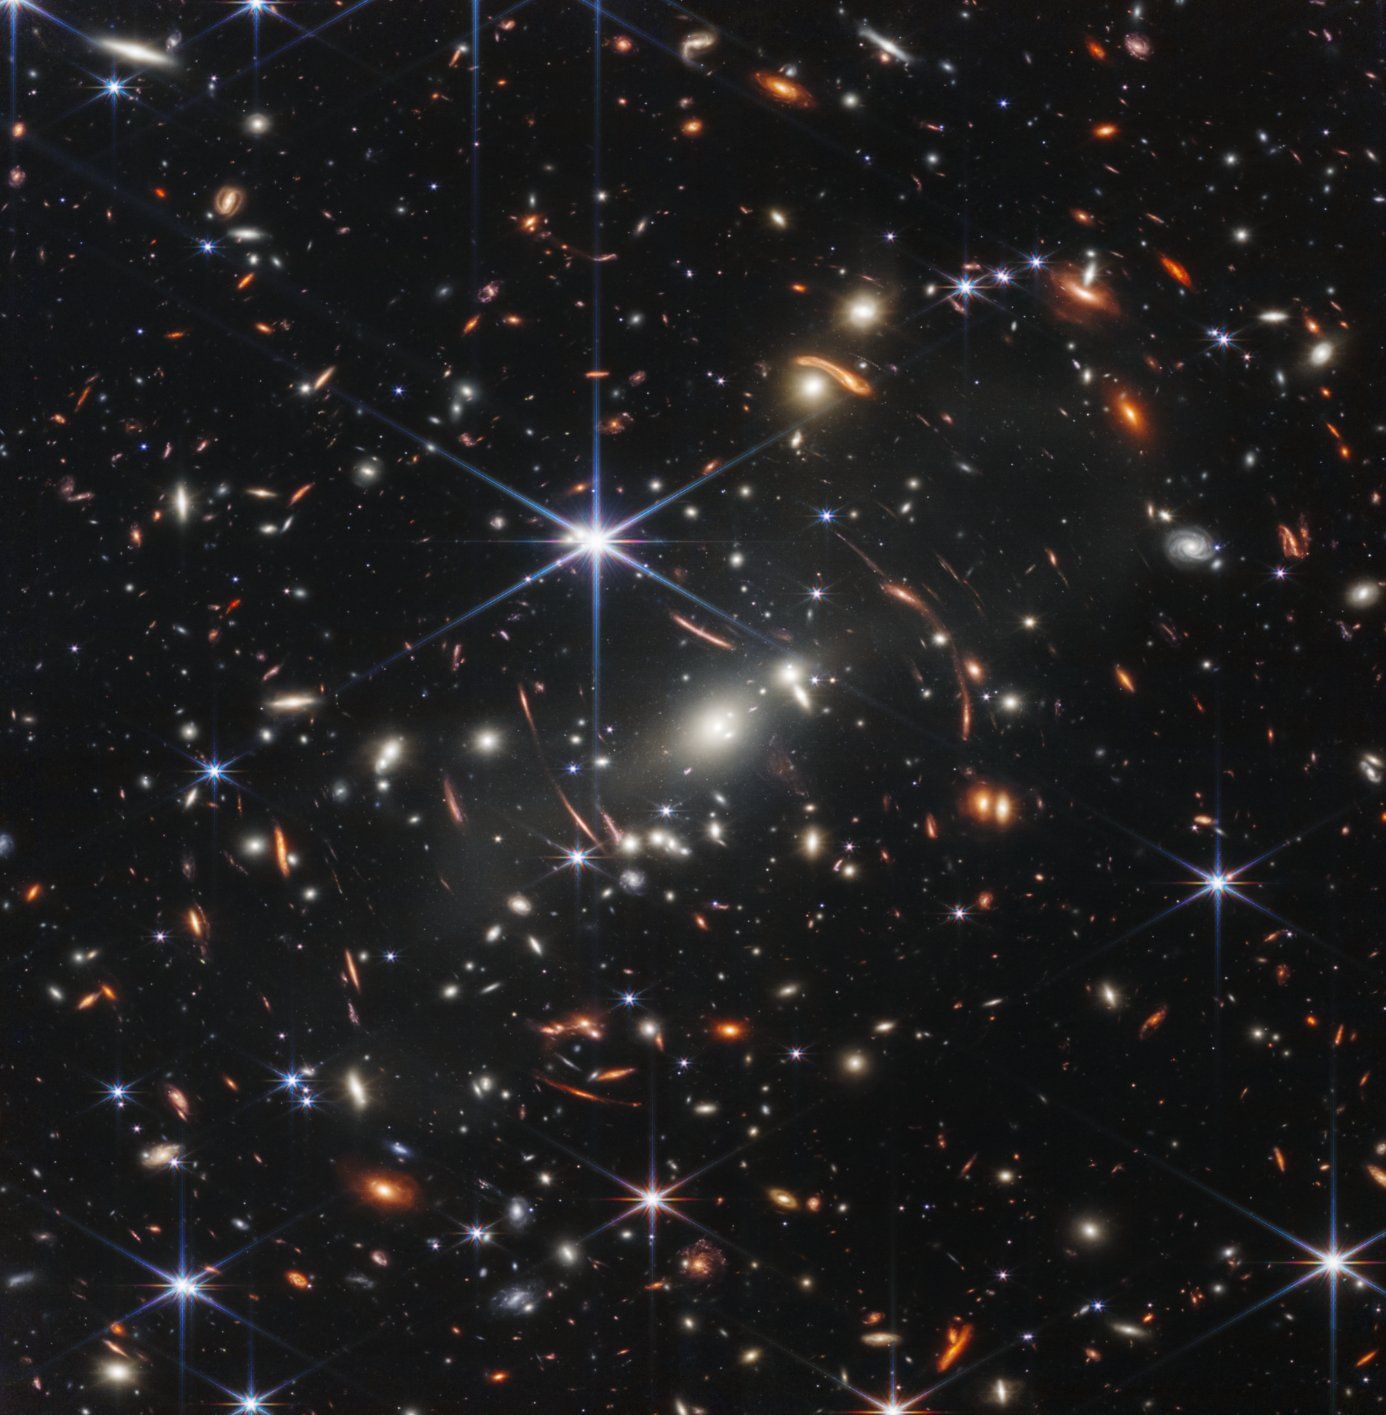 James Webb vs Hubble: How the images from the two telescopes differ